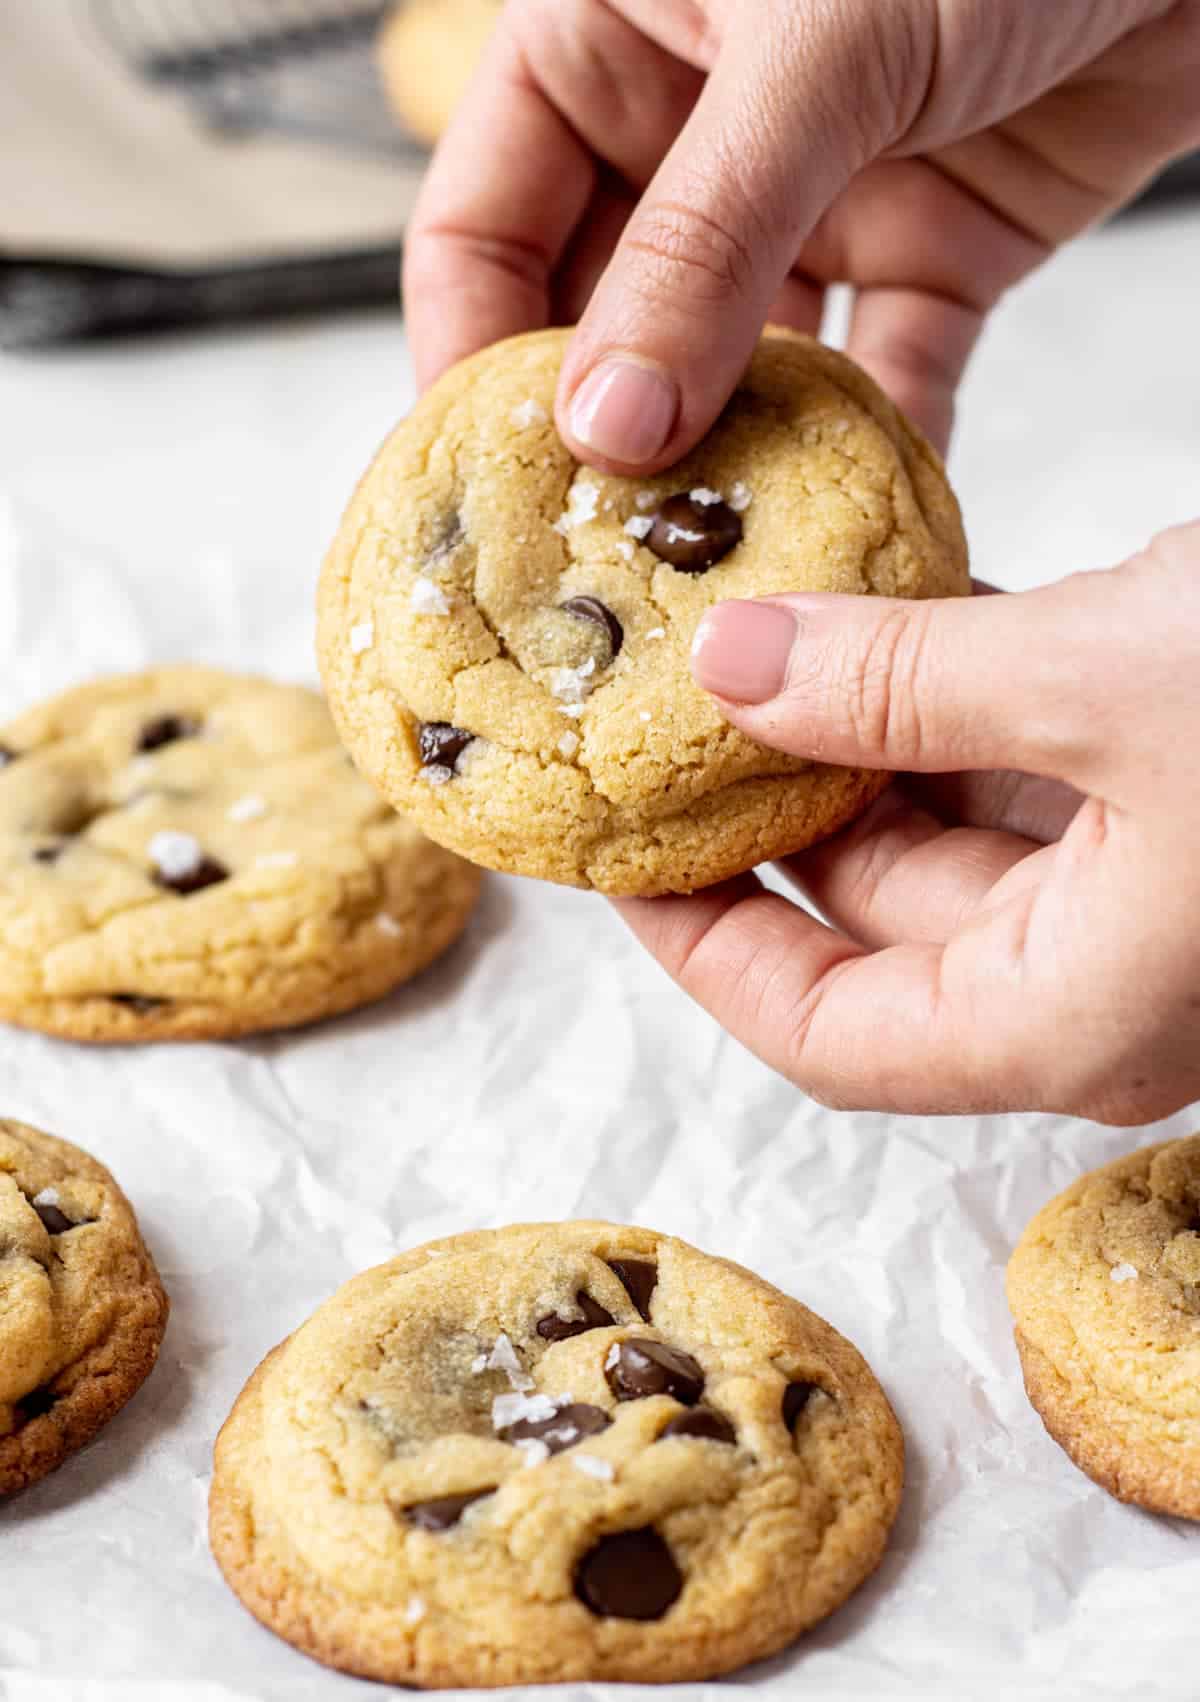 A Chocolate Chip Cookie Without Brown Sugar is held above a tray with other cookies.